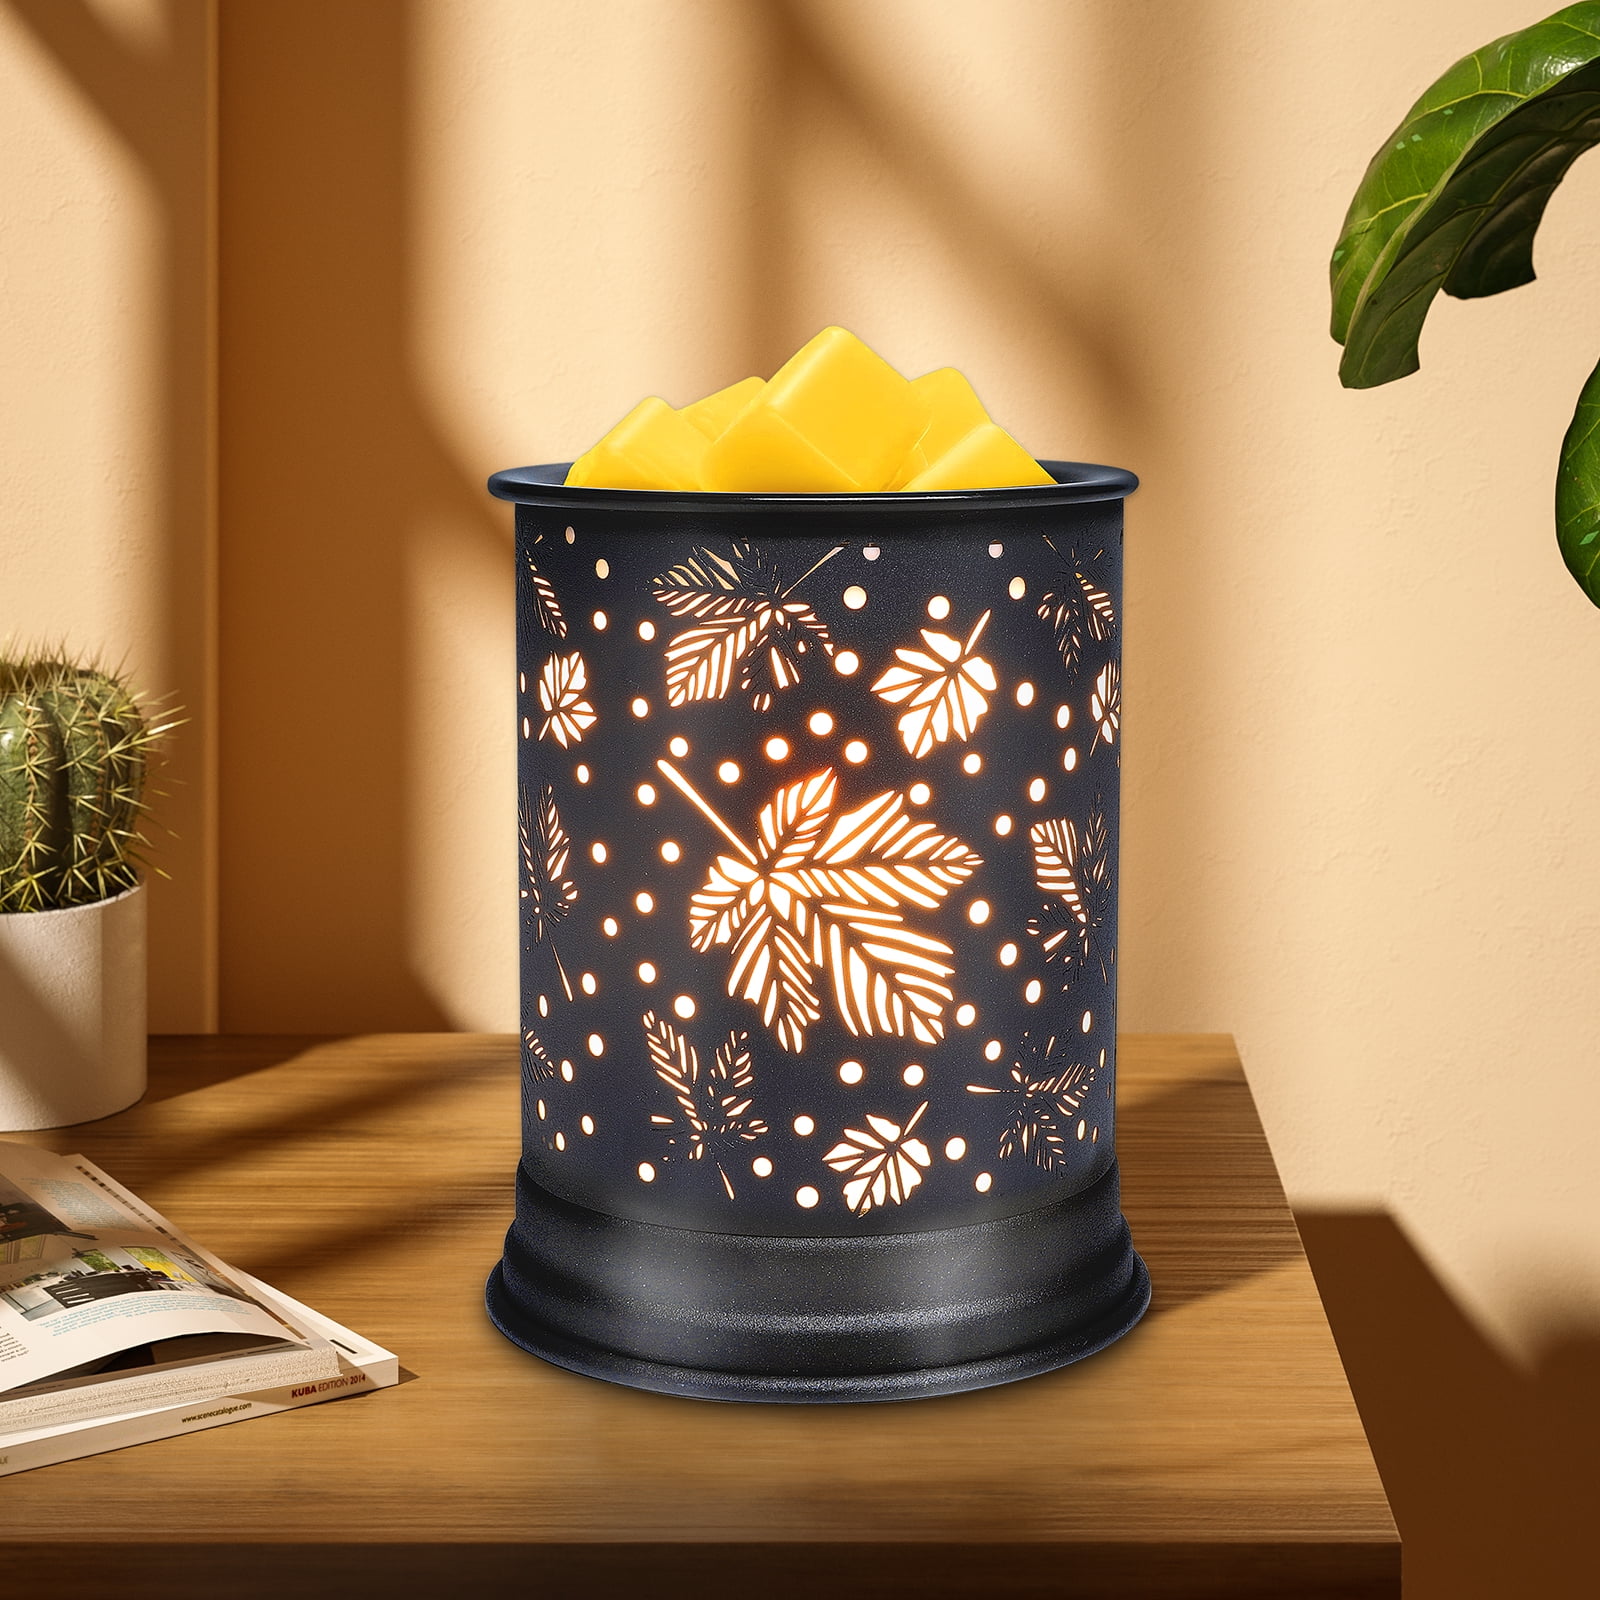 Crystal Wax Melt Warmer, Ornix Electric Wax Warmer for Scented Wax, Oil Burner Wax Melt Night Light for Gift, Home, Spa, Office, Size: 3.74 x 3.74 x